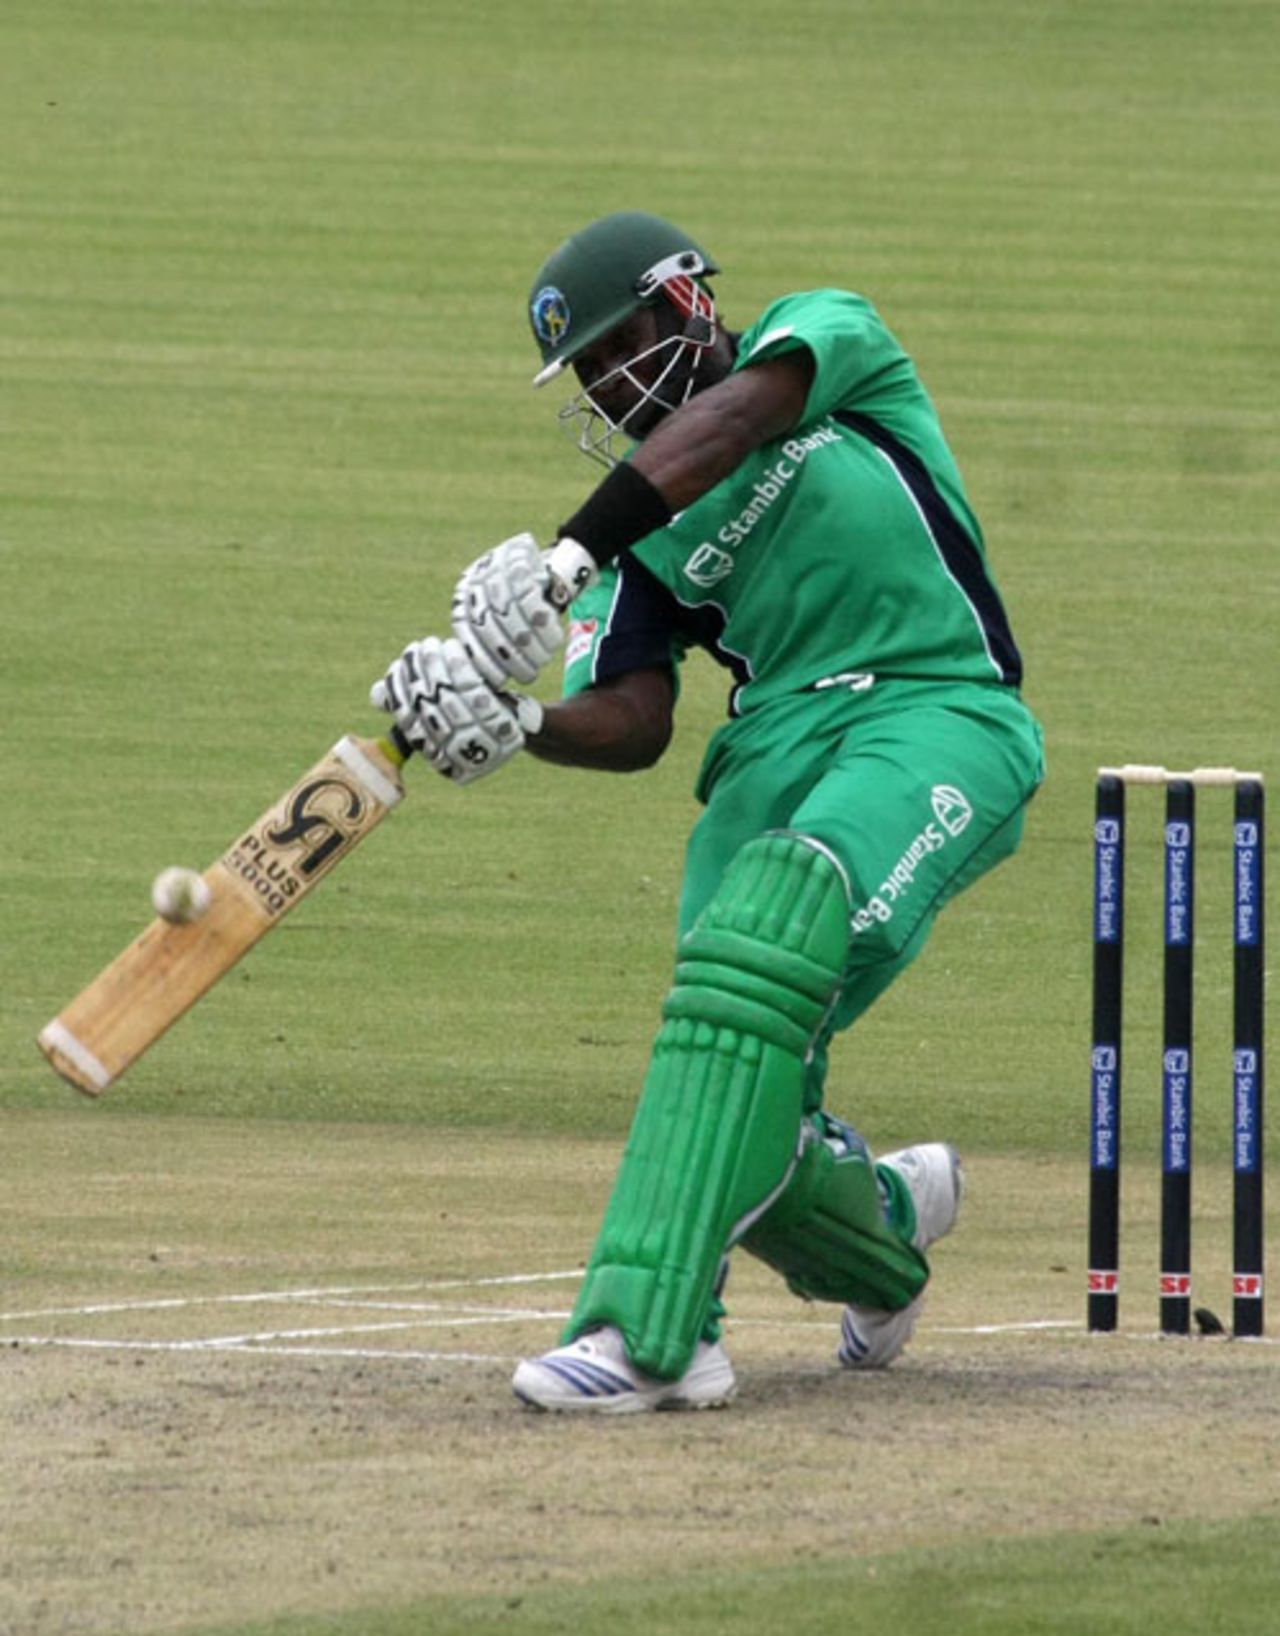 Hamilton Masakadza smashes a boundary during his match-winning innings for the Mountaineers, Mid West Rhinos v Mountaineers, Stanbic Bank T20, February 12, 2010